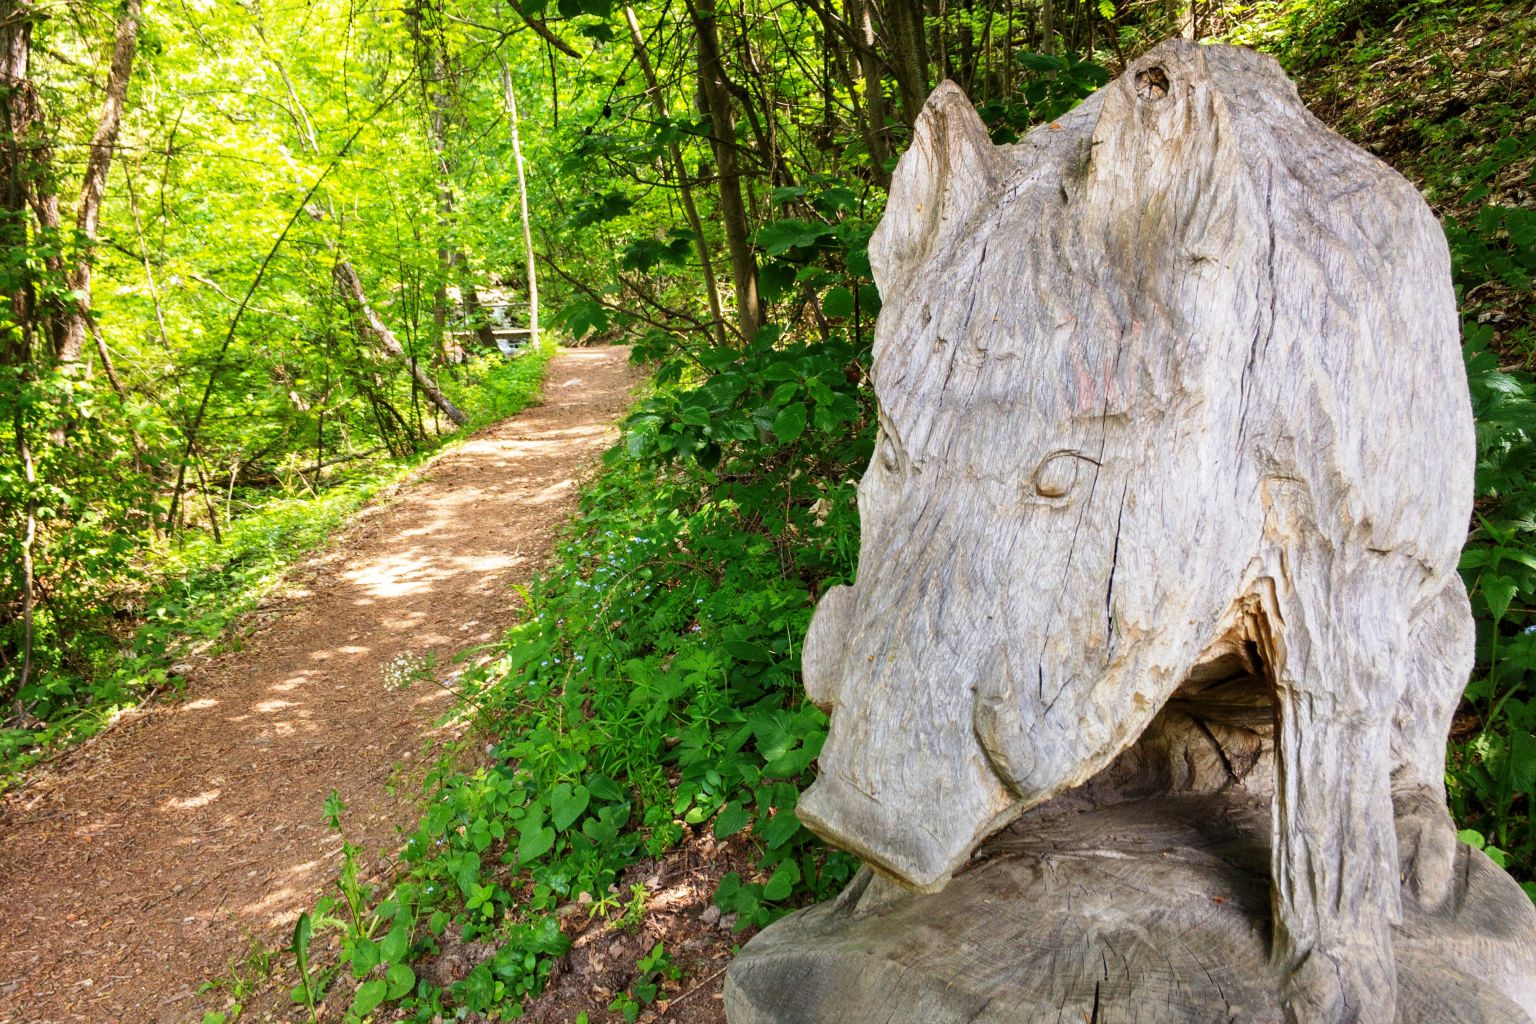 Admire the native wildlife carved into the wood, Valais, Switzerland